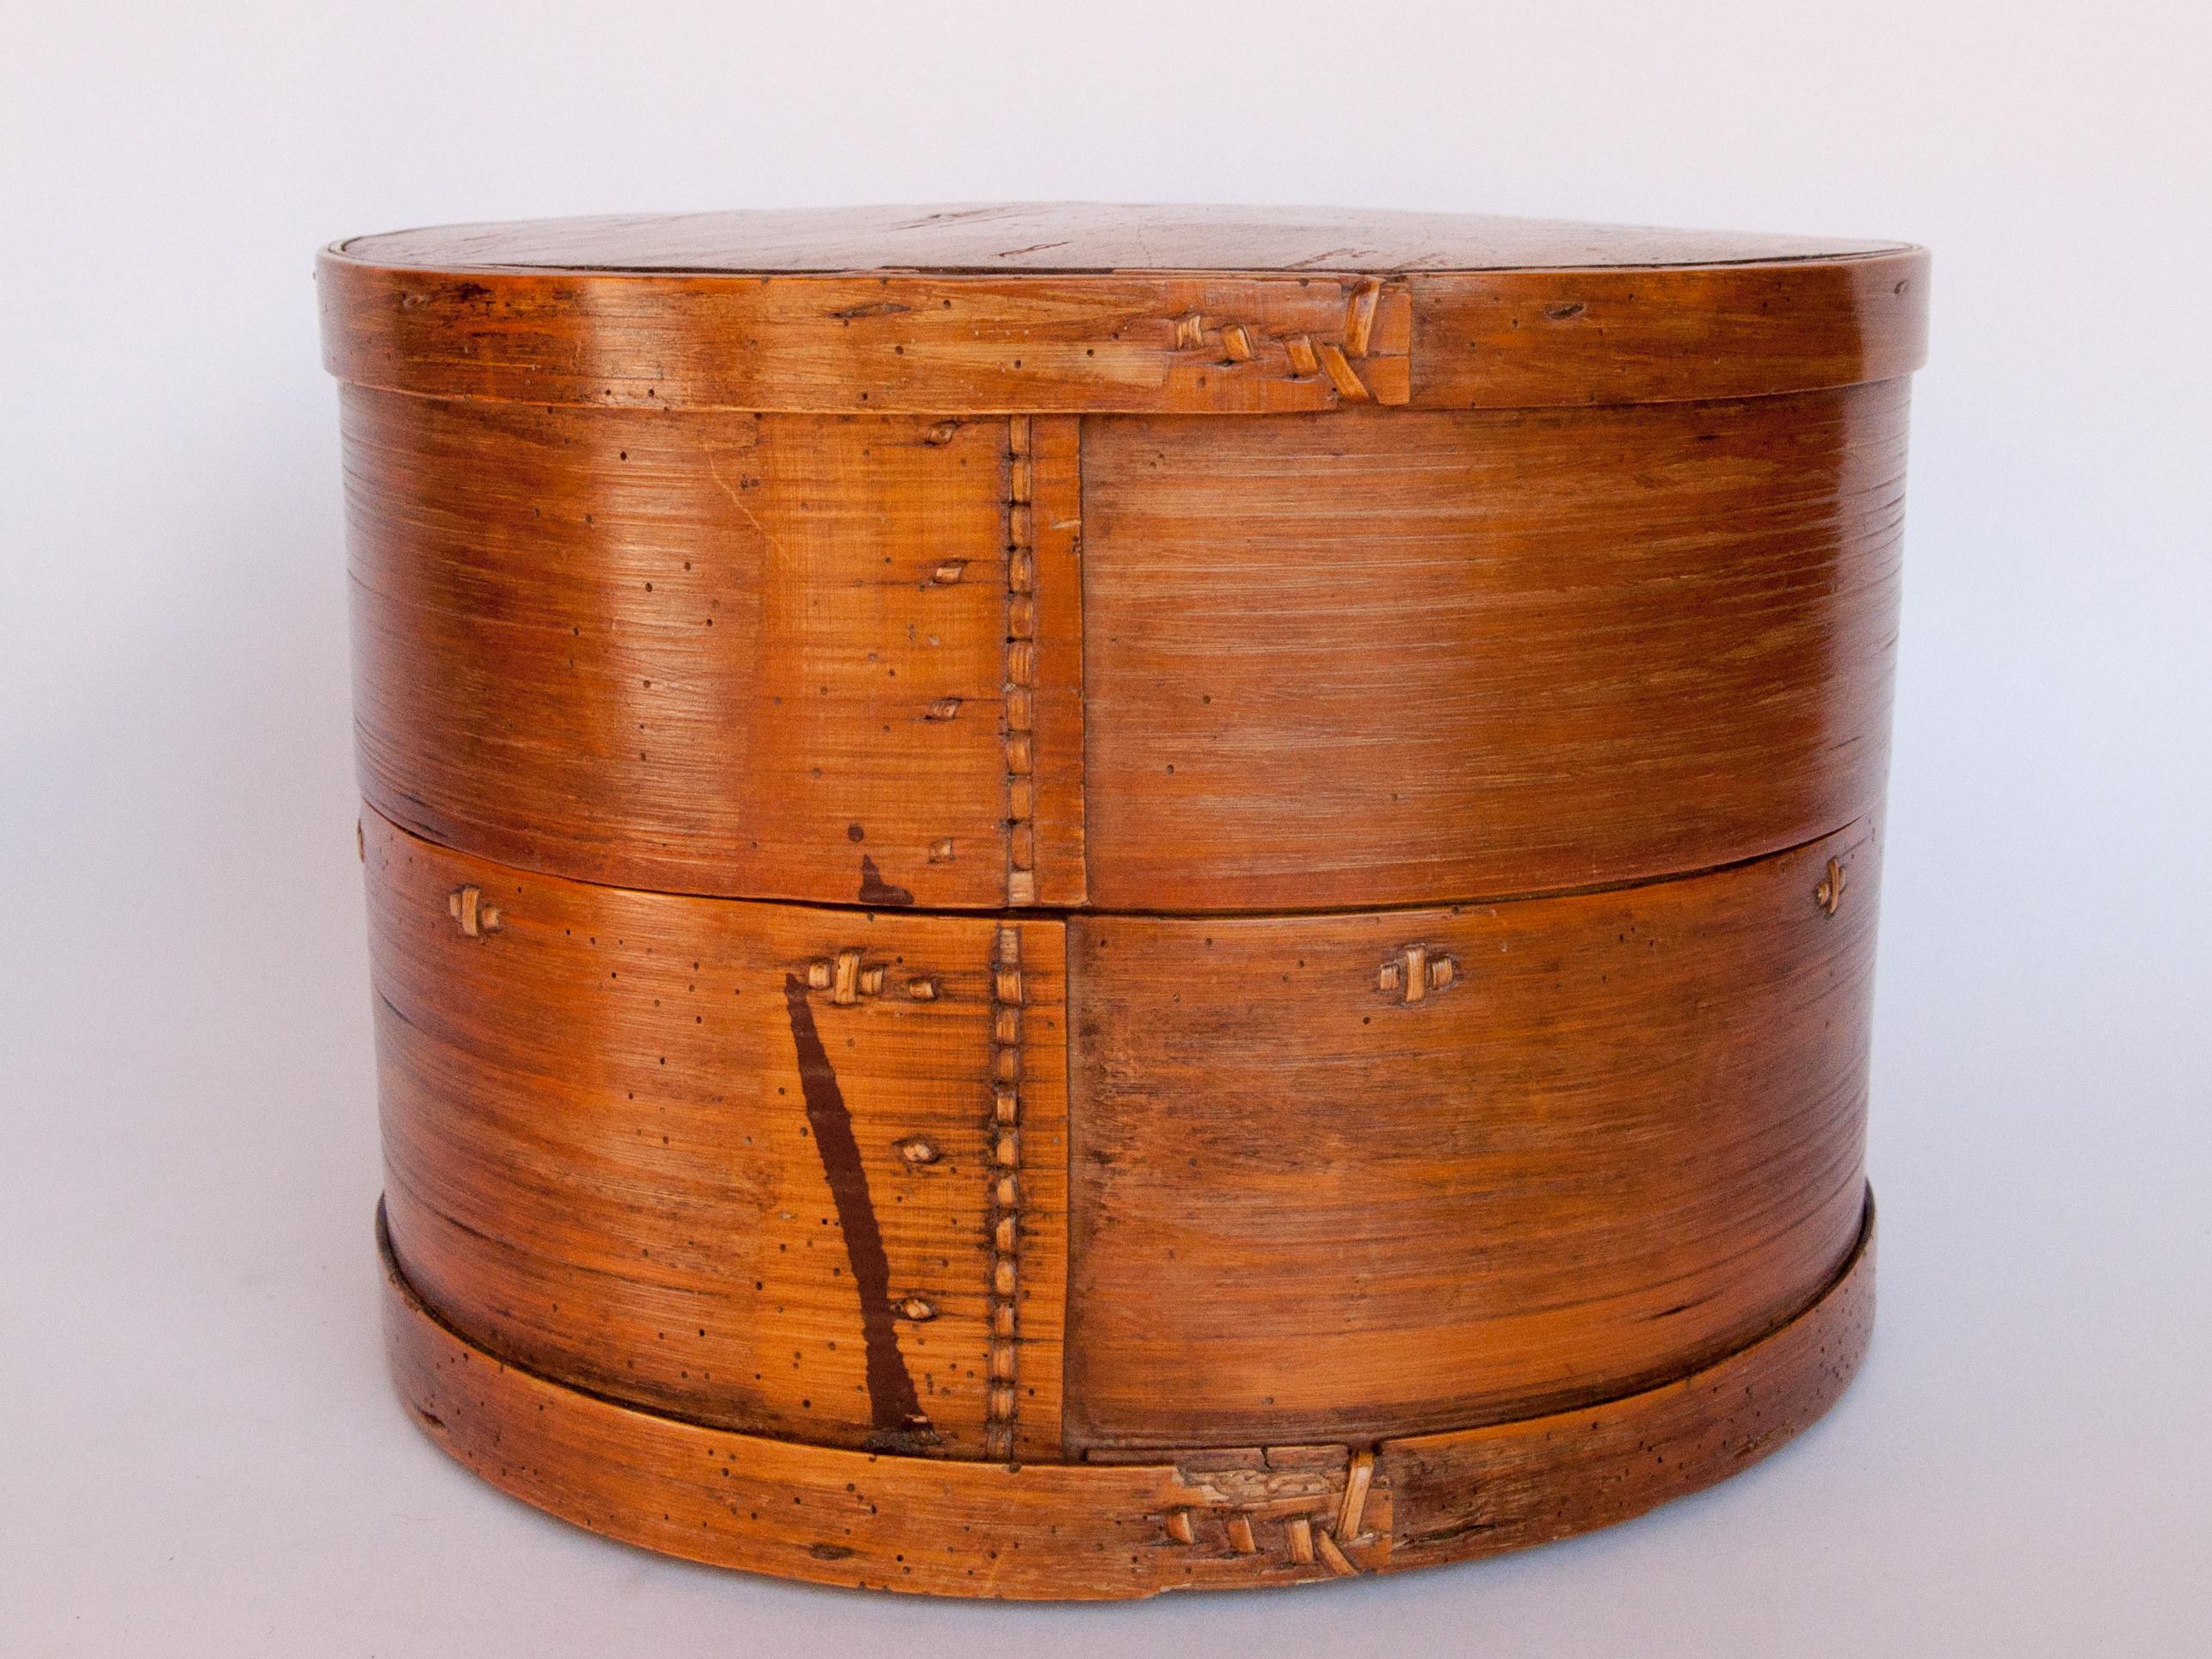 Vintage bamboo kitchen box from Bhutan, mid-20th century.
This container, made from bamboo, was used to store kitchen and food items in a traditional Bhutanese home.
Condition: This is an old box which has seen many years of household service, and